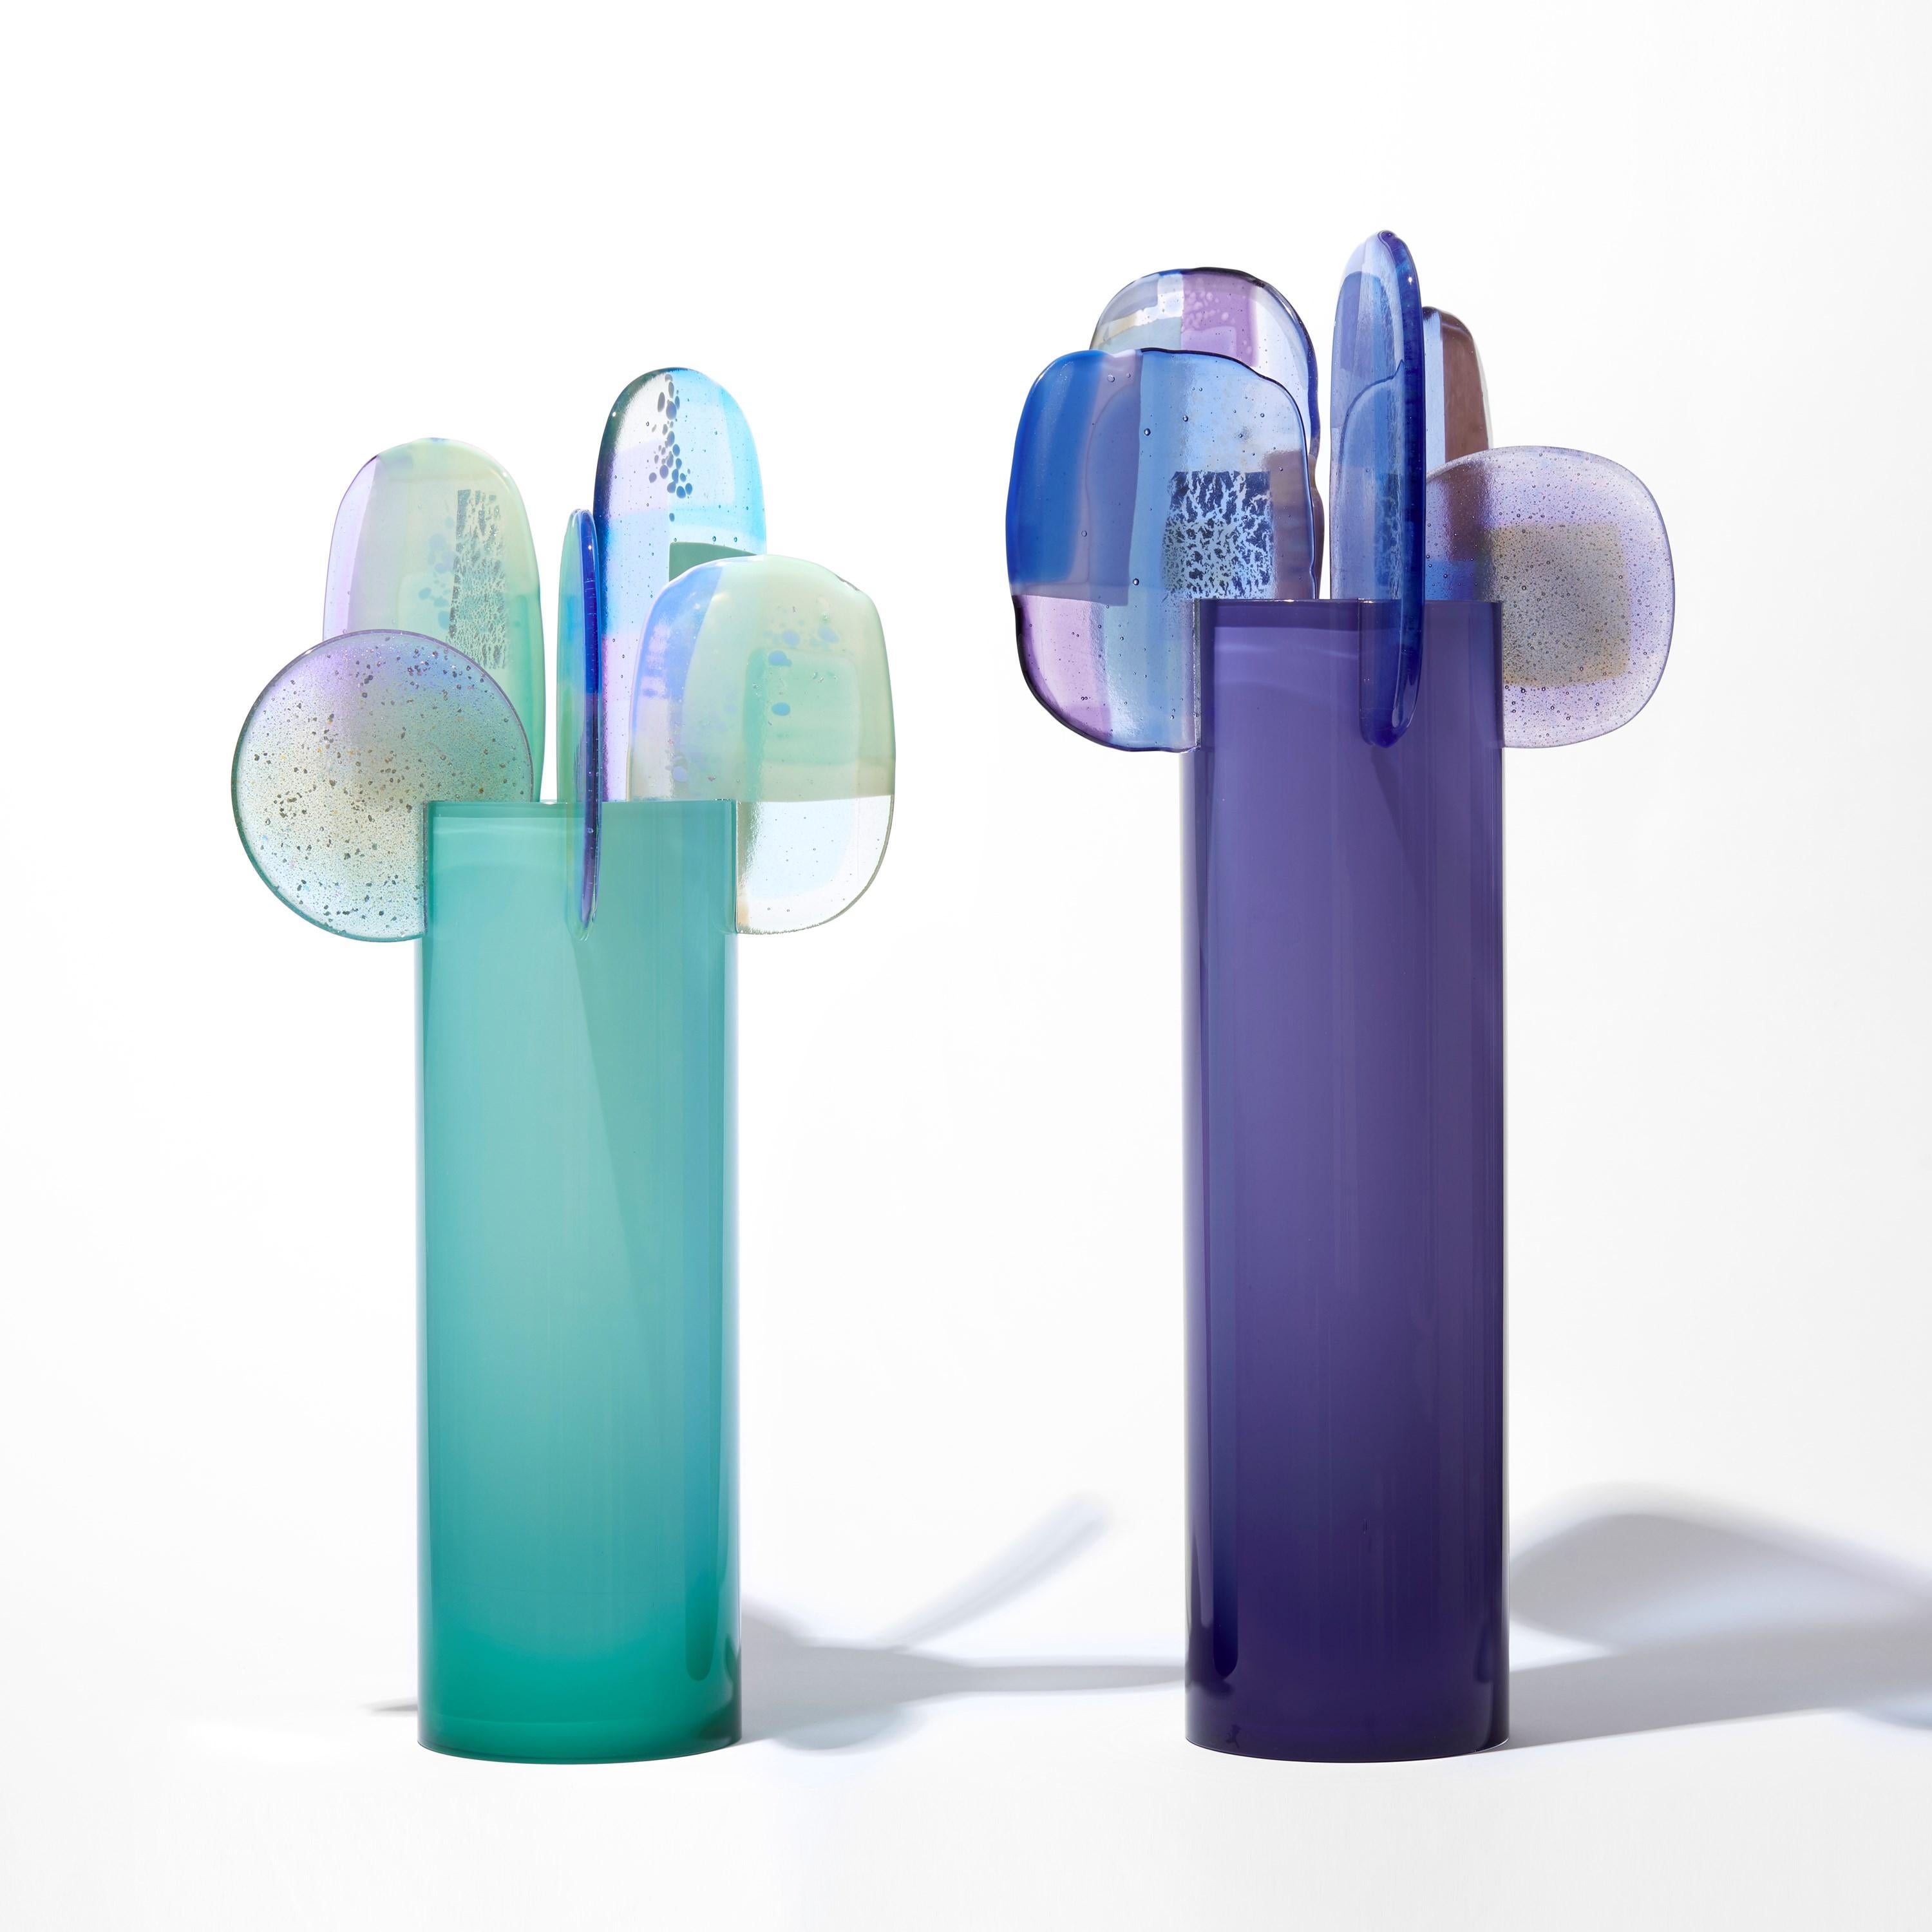 Contemporary Paradise 08 in Amethyst, a purple, blue & mauve glass sculpture by Amy Cushing